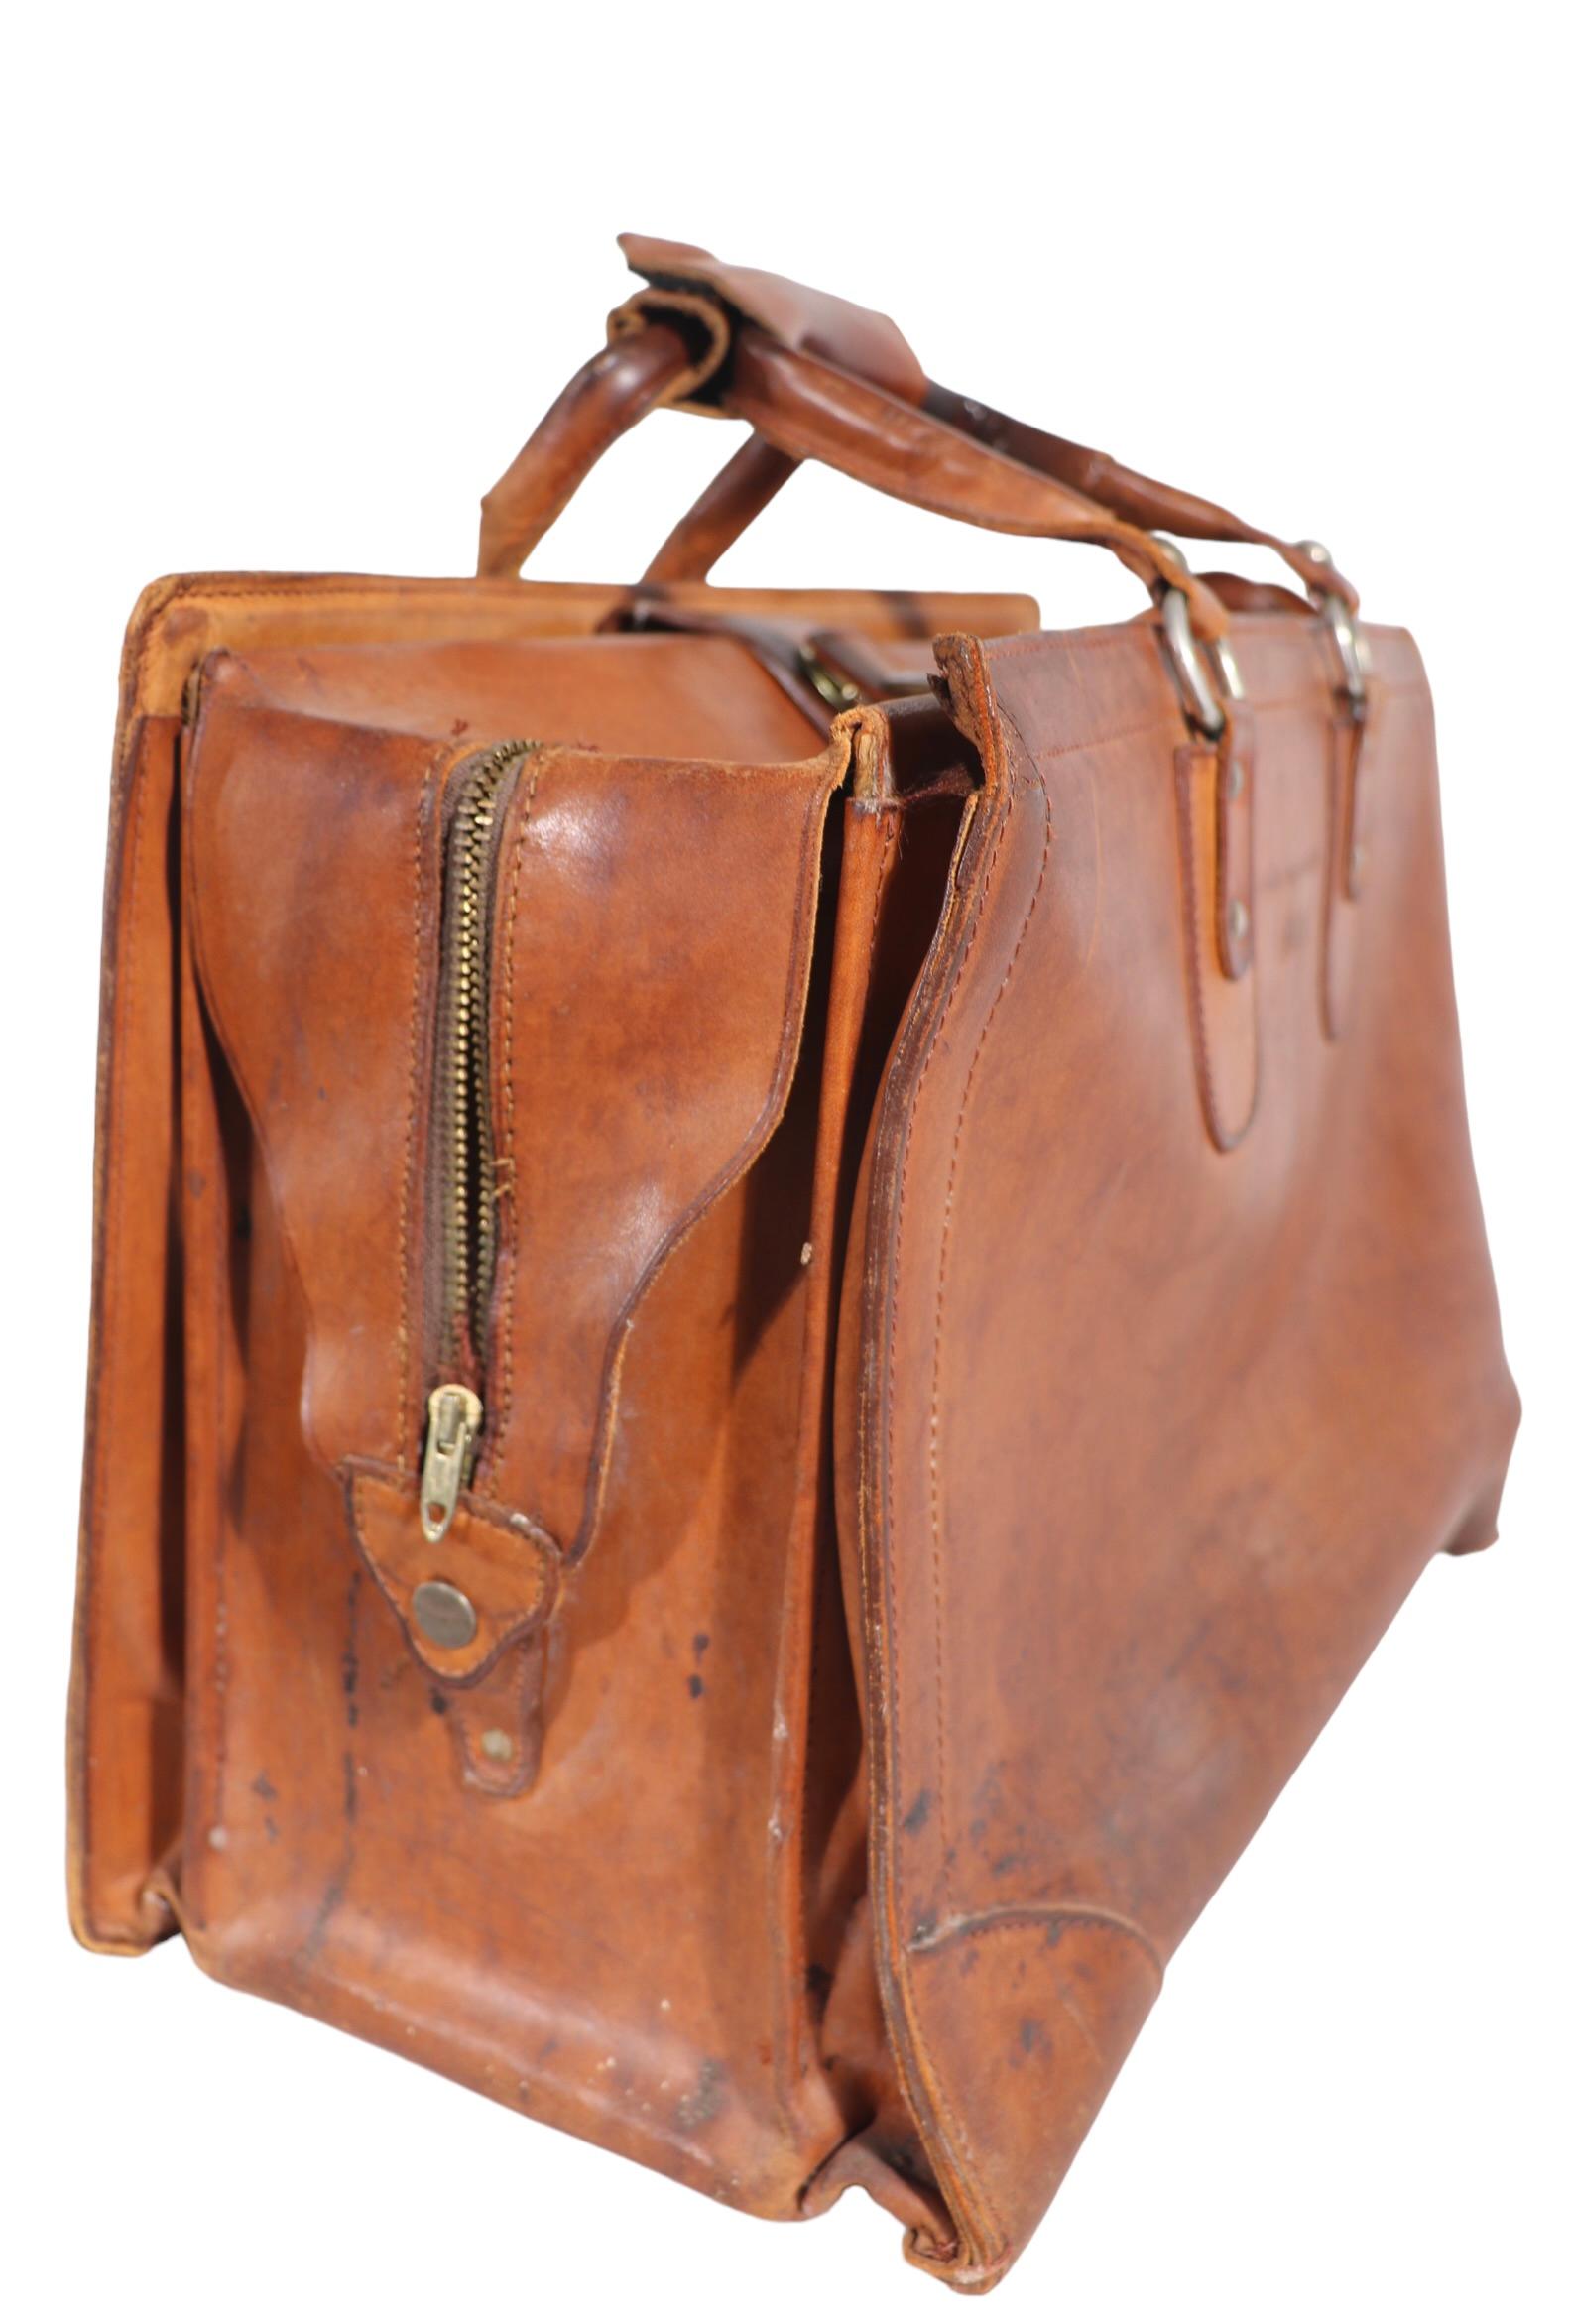 20th Century Vintage Brown Leather Carry Bag Suitcase 